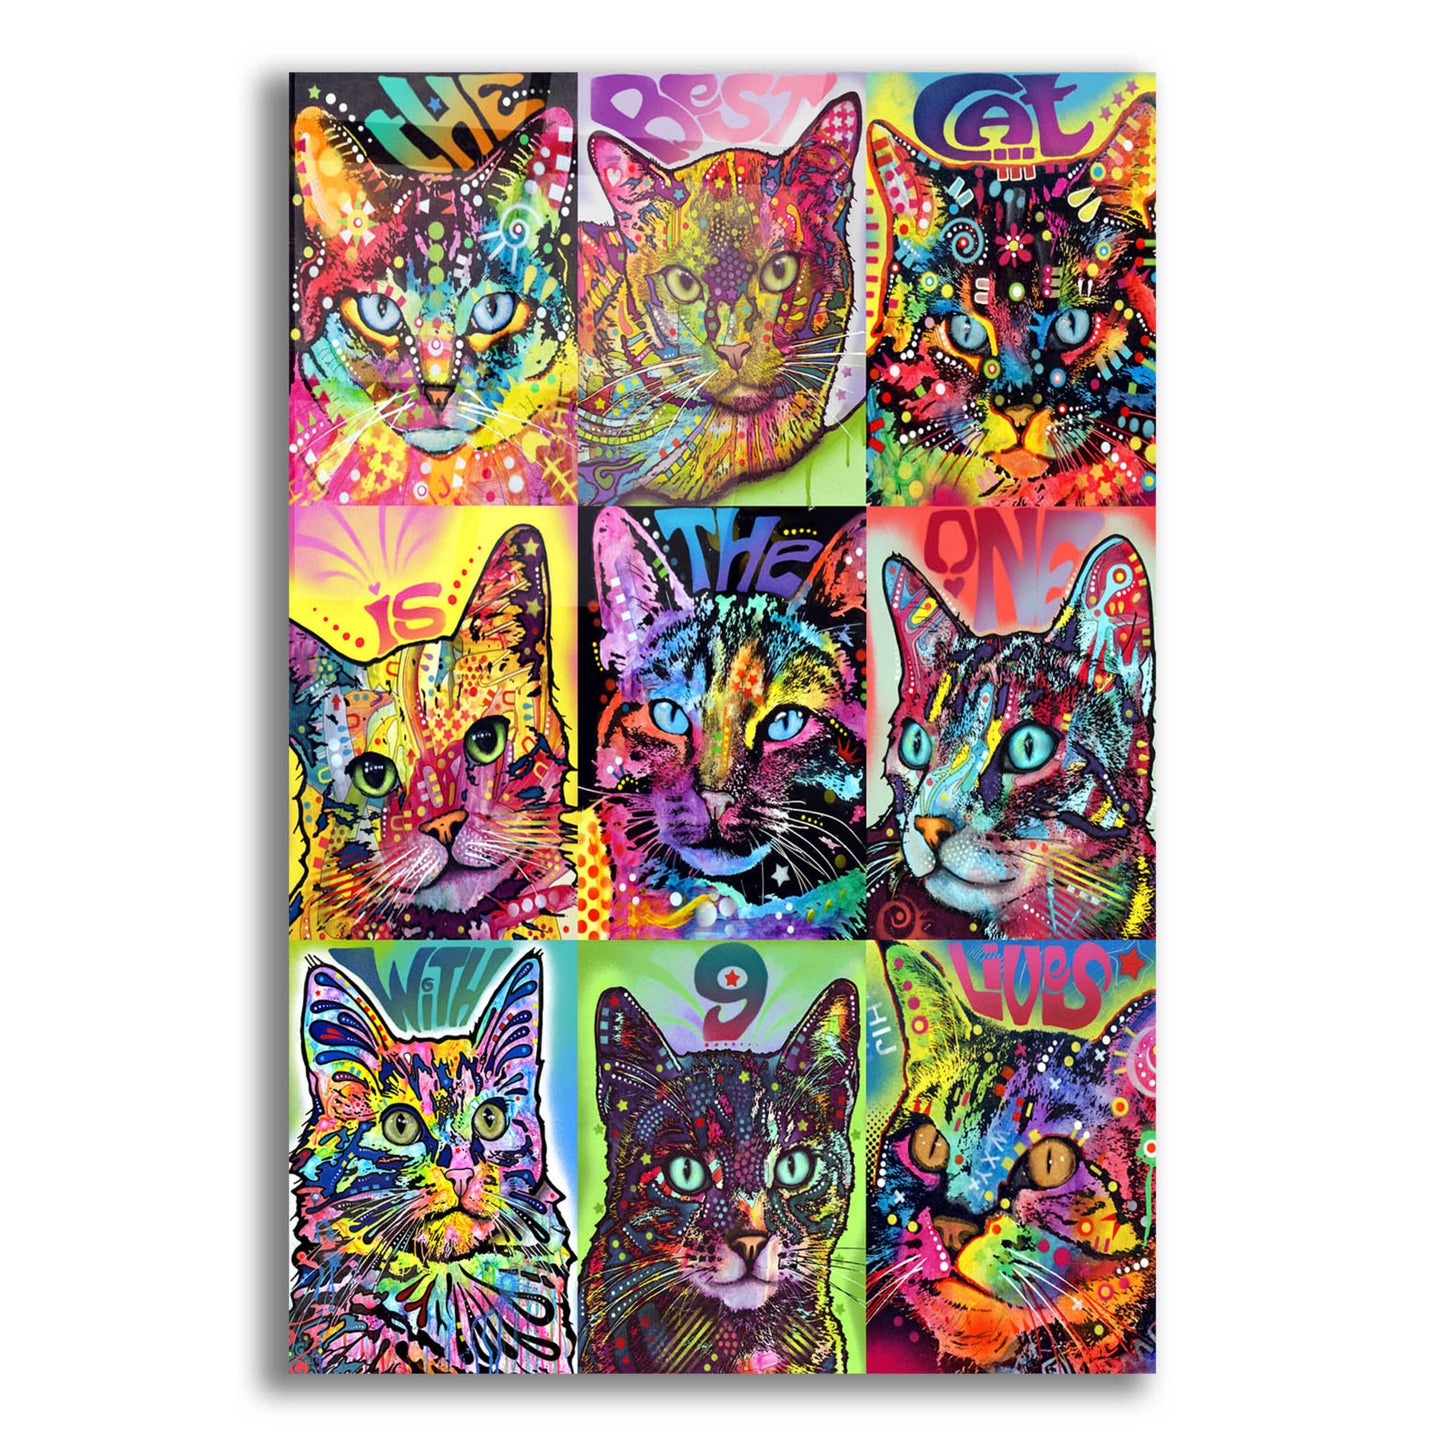 Epic Art 'Nine Up of Cats' by Dean Russo, Acrylic Glass Wall Art